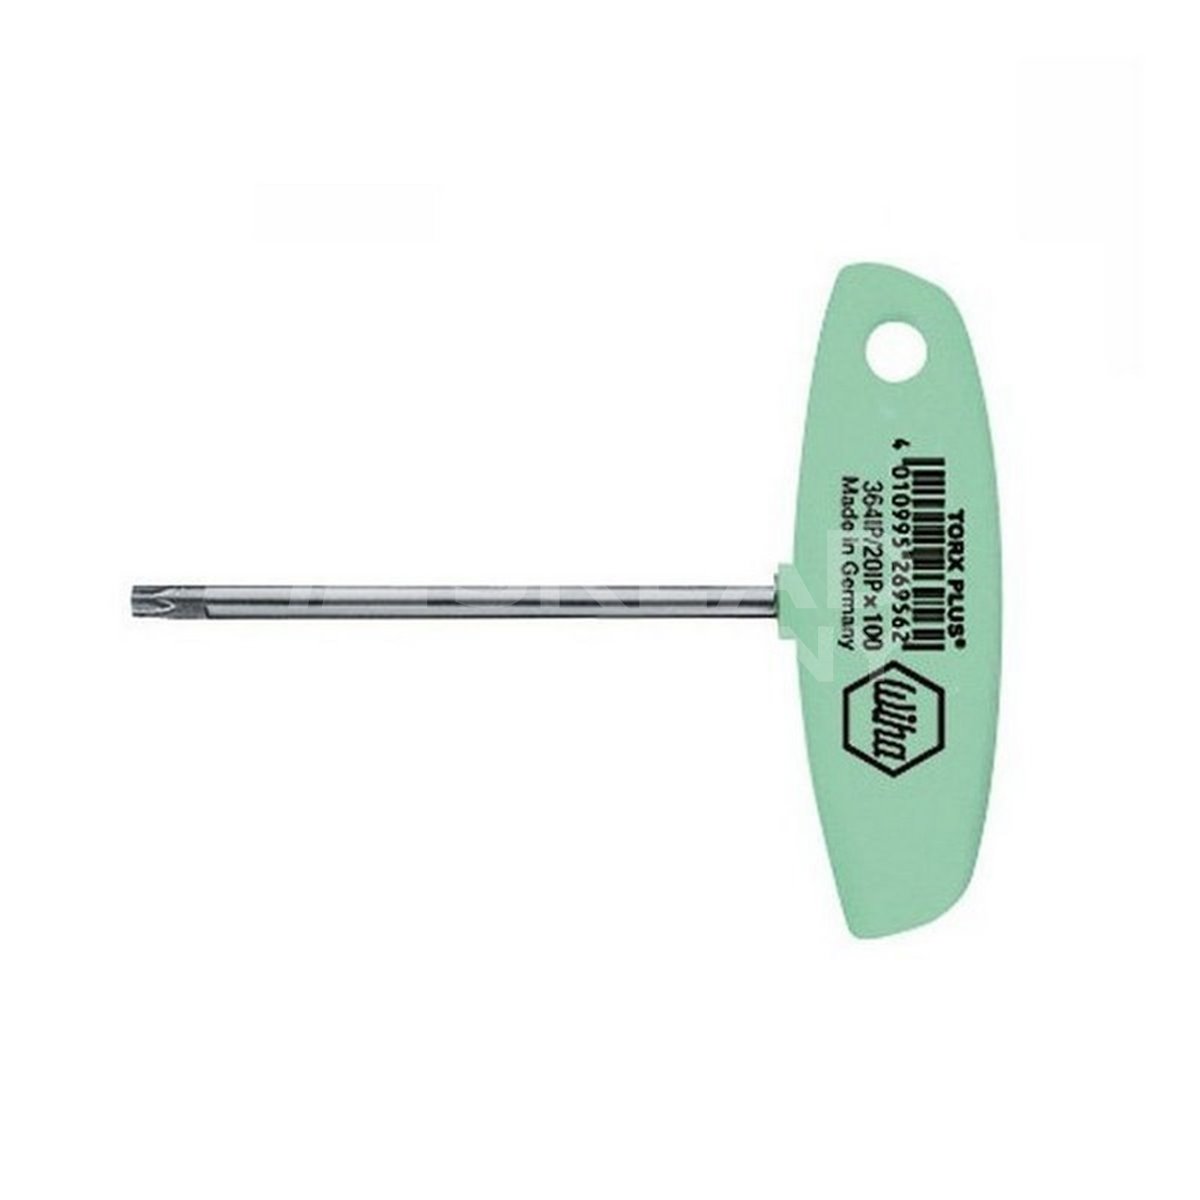 Torx Plus key with T-handle. Classic 364IP 27IP 150mm by Wiha 26958.